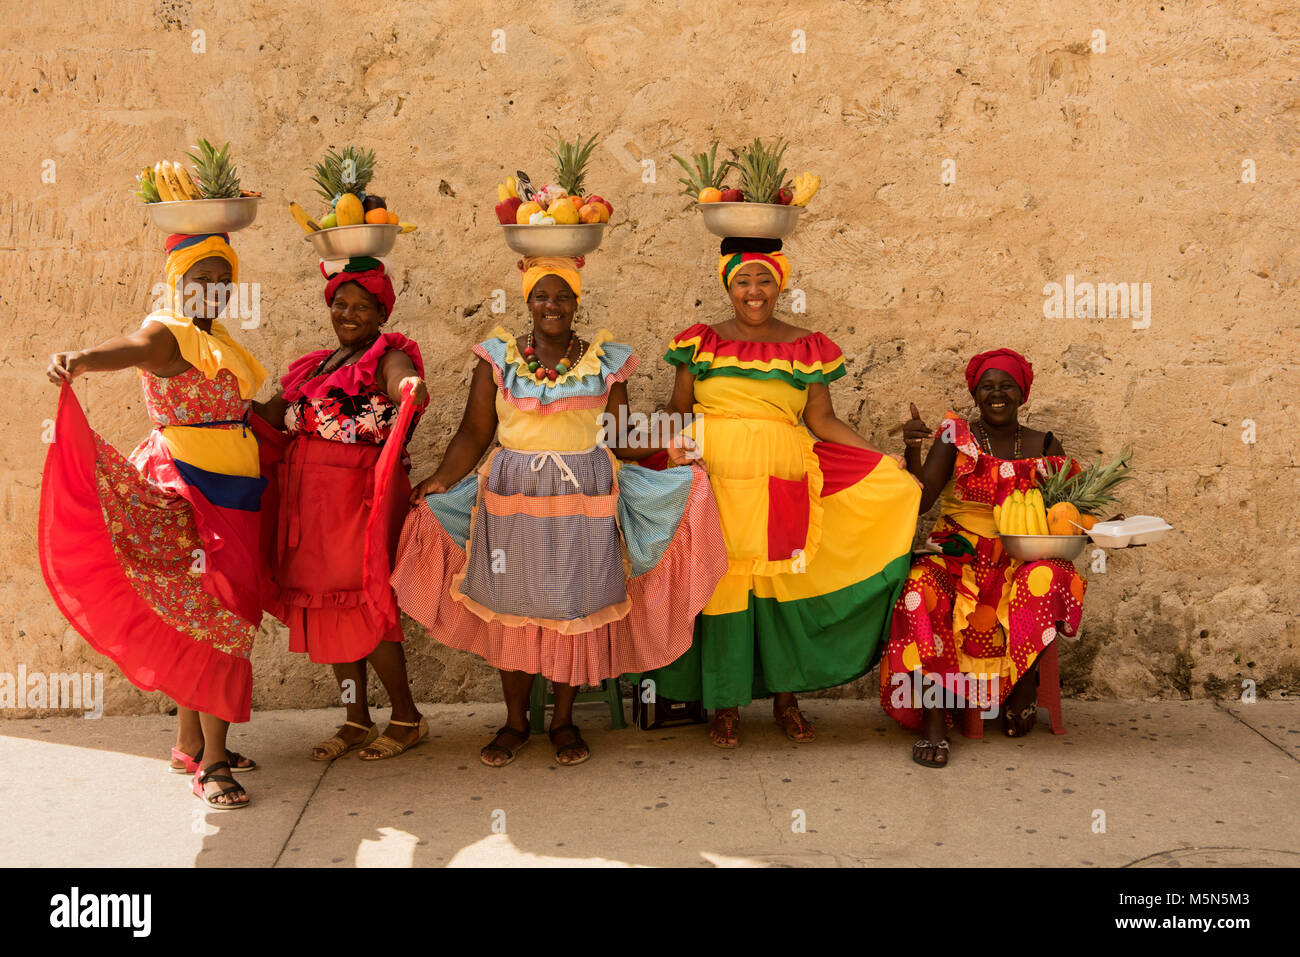 Women in colorful local costumes pose with fruit baskets in Cartagena, Colombia. Stock Photo